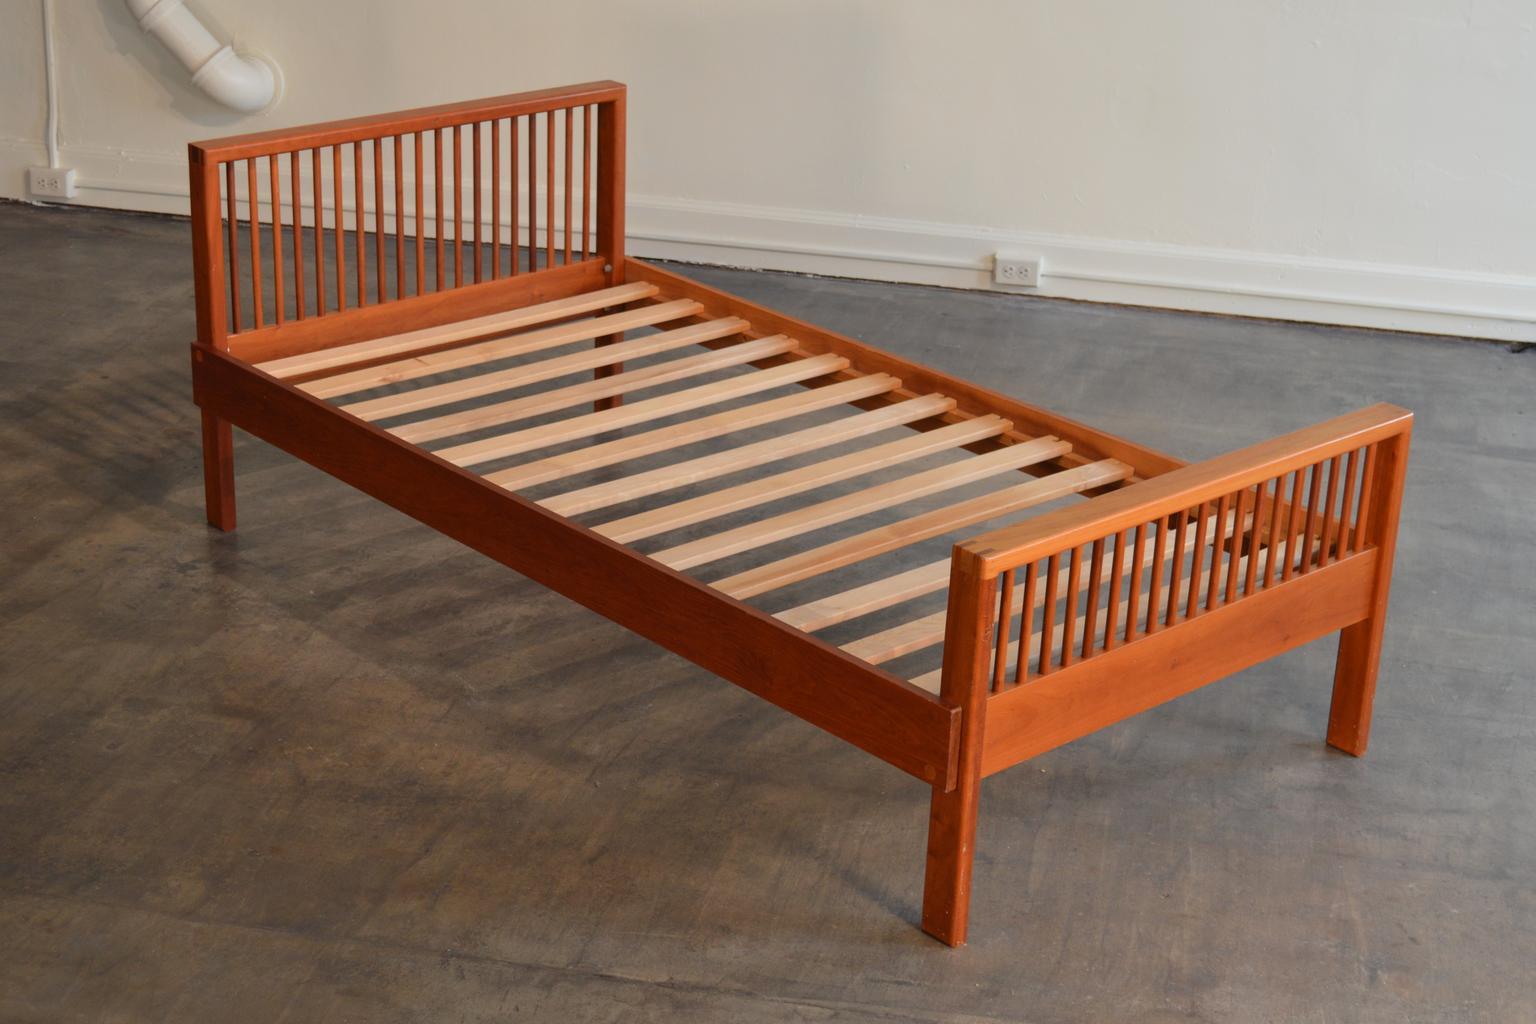 Charles Webb single cherrywood bed frame. Finger-jointed on the upper corners. Slat base. Sticker label. Disassembles to ends, rails, and slats. Made in Massachusetts. The company produced furniture from the 1960s-1990s.